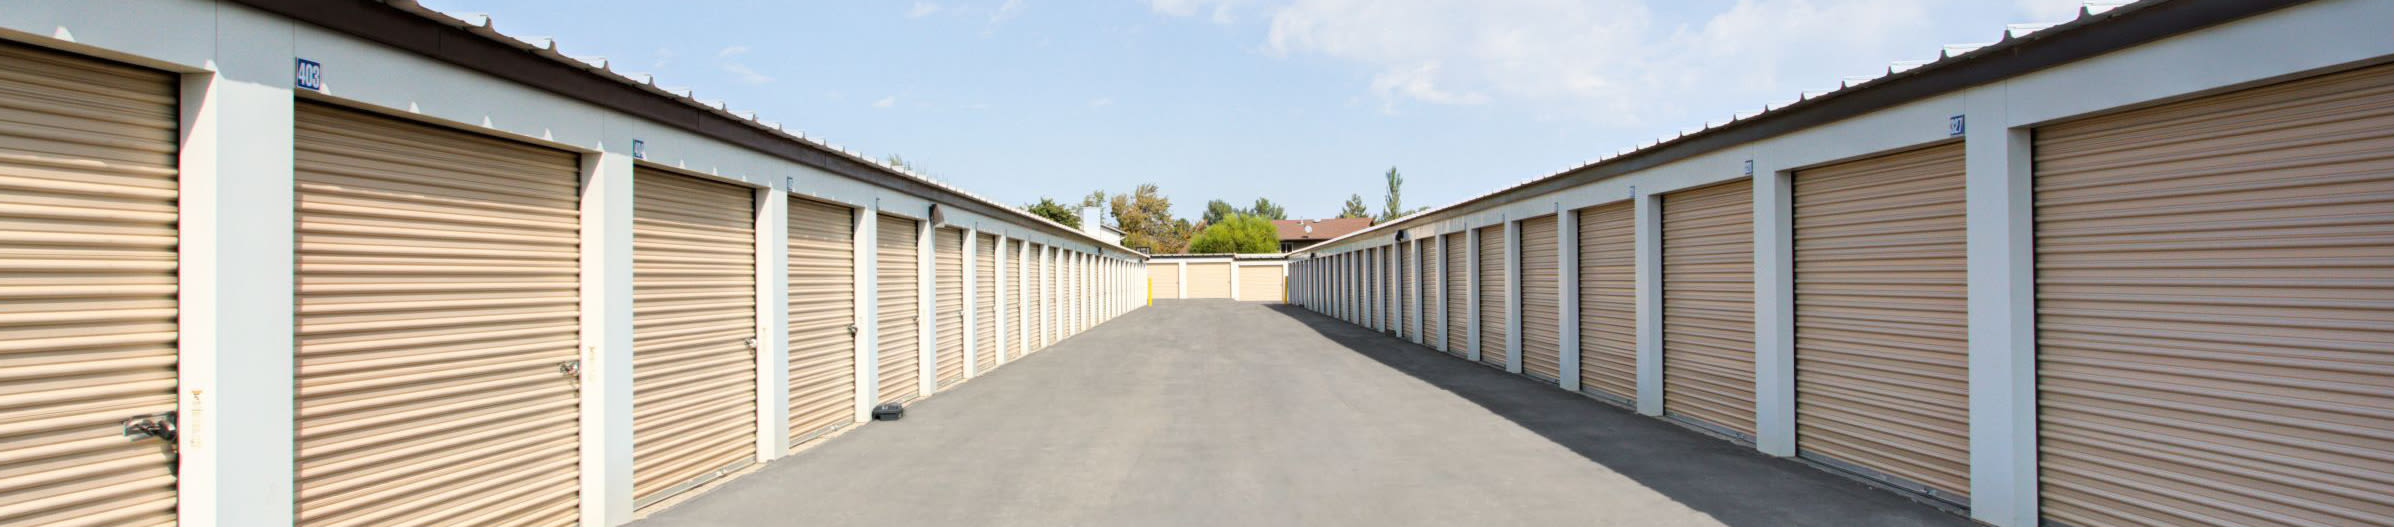 Photos of our self storage facility in Kearns UT